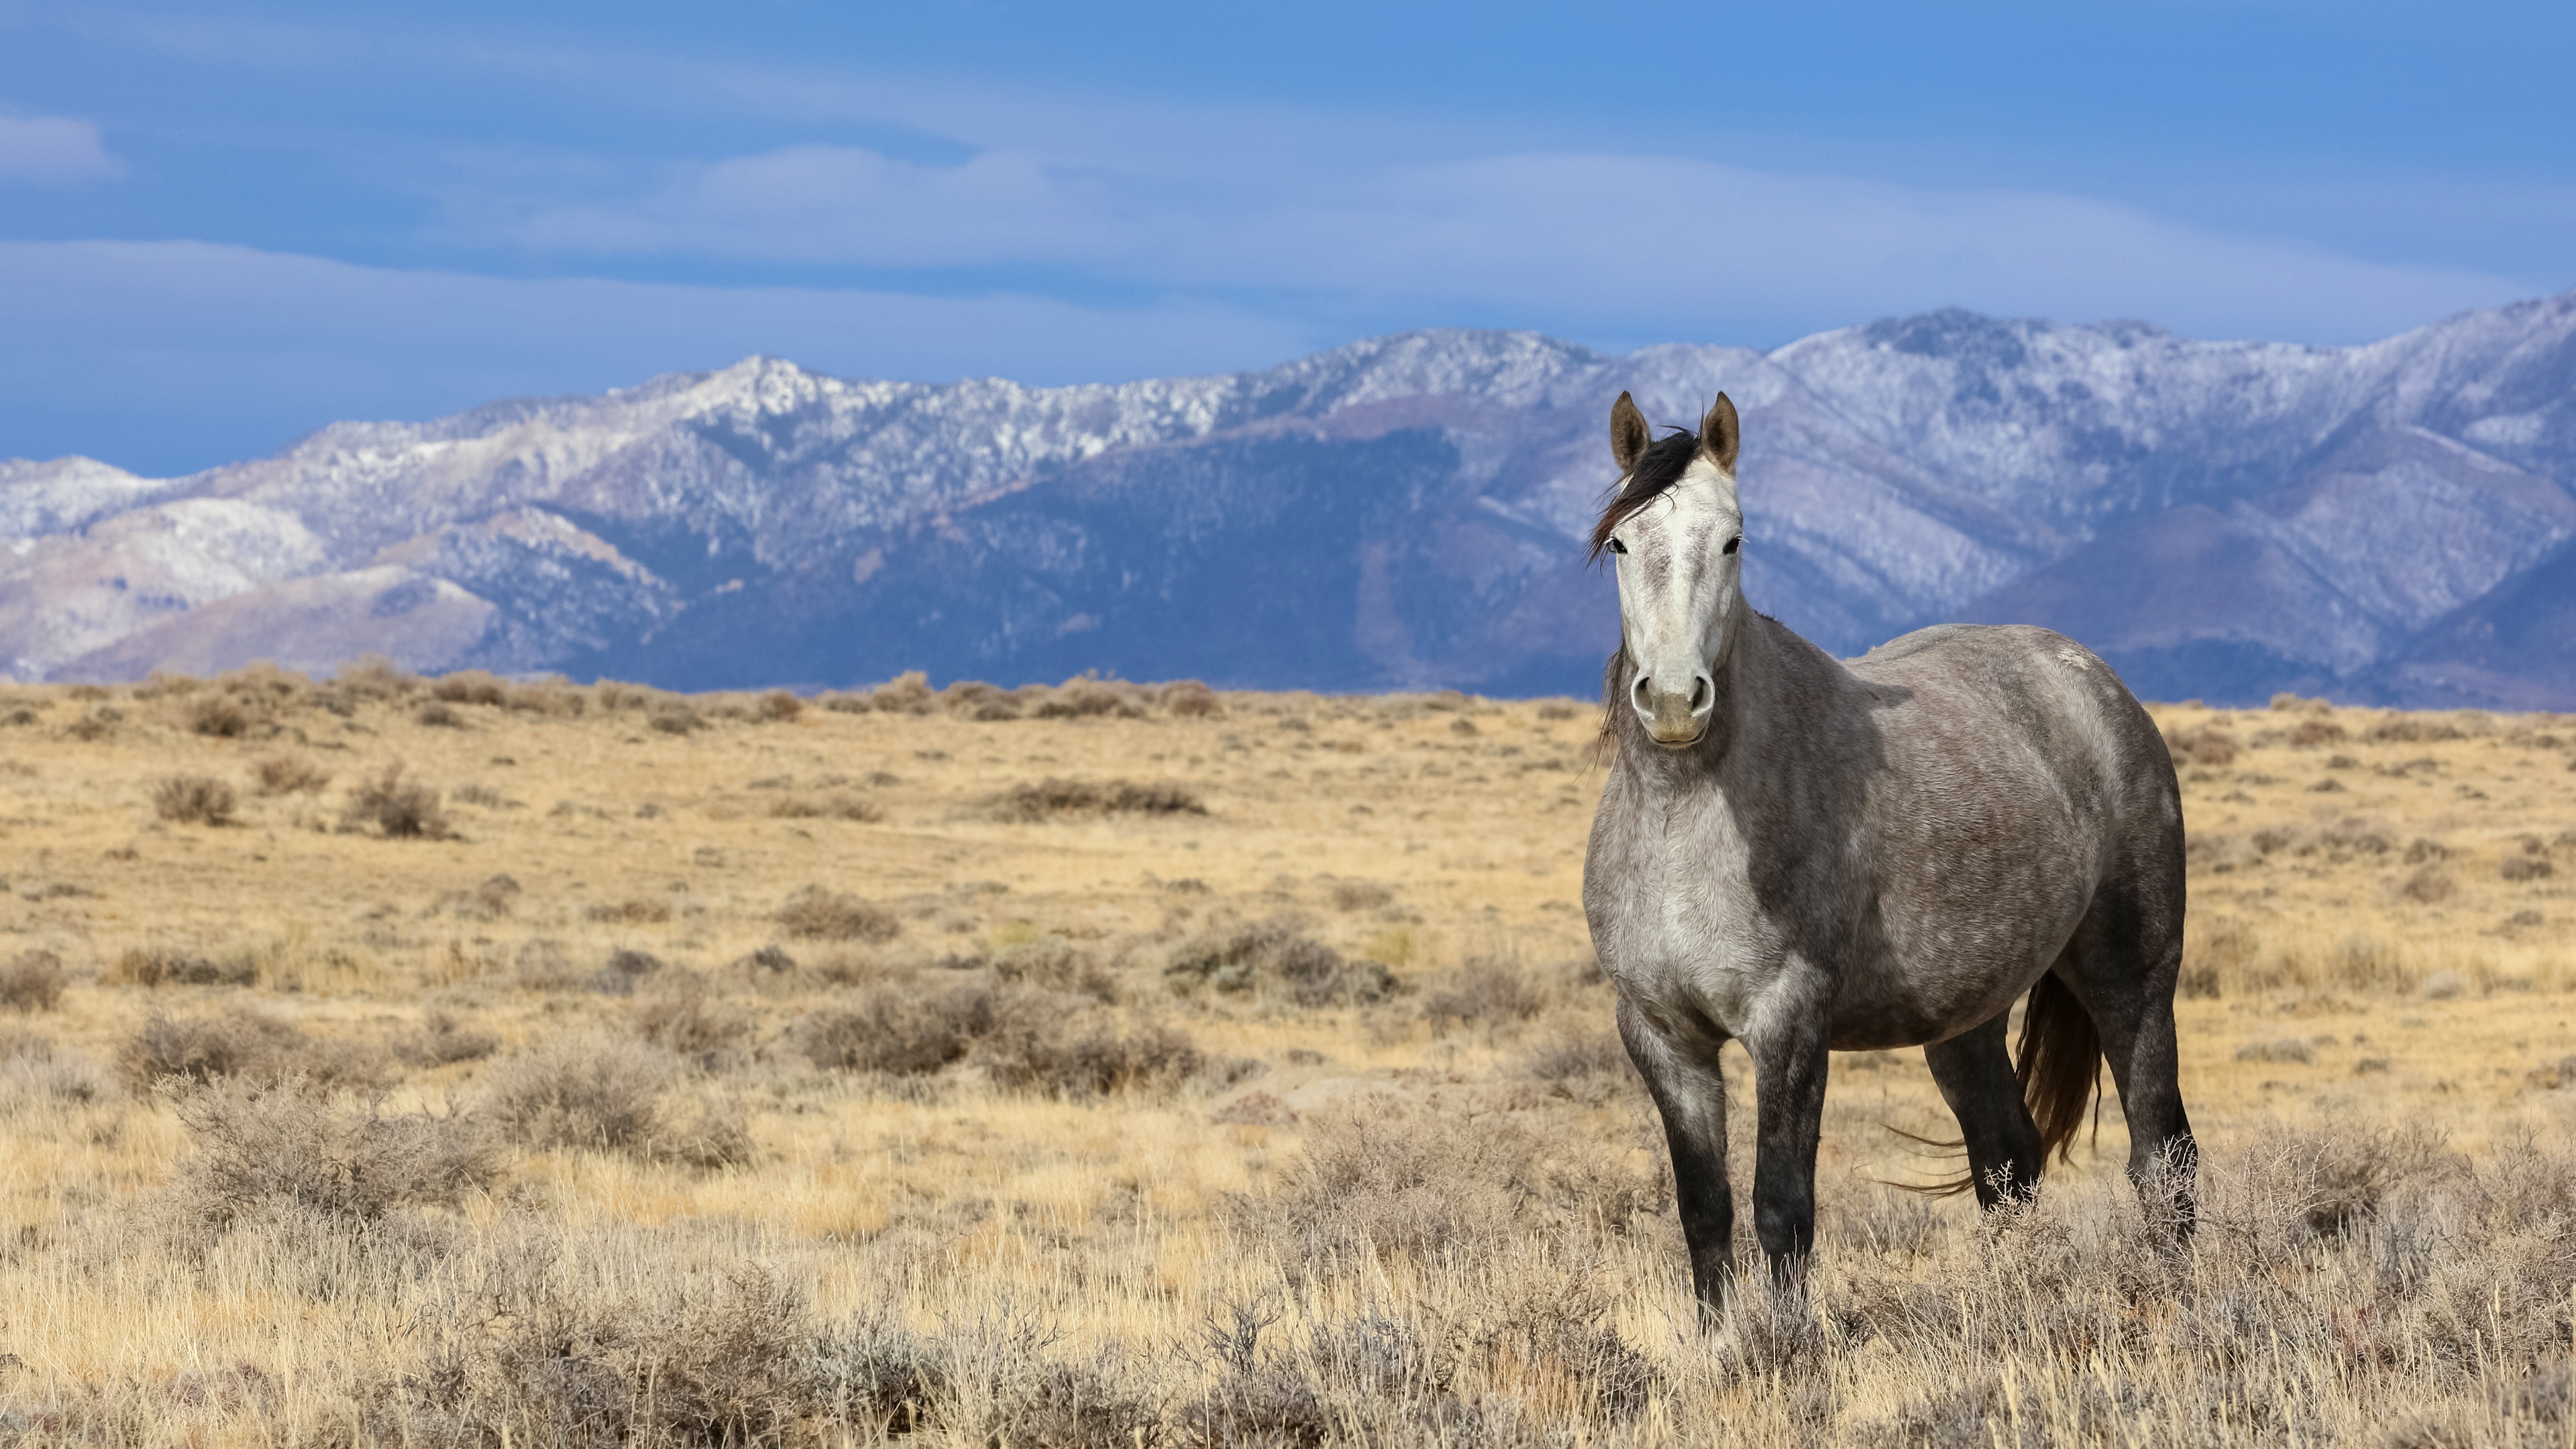 Horse: The mustang, Descended from horses brought to the Americas by the Spanish. 3840x2160 4K Background.